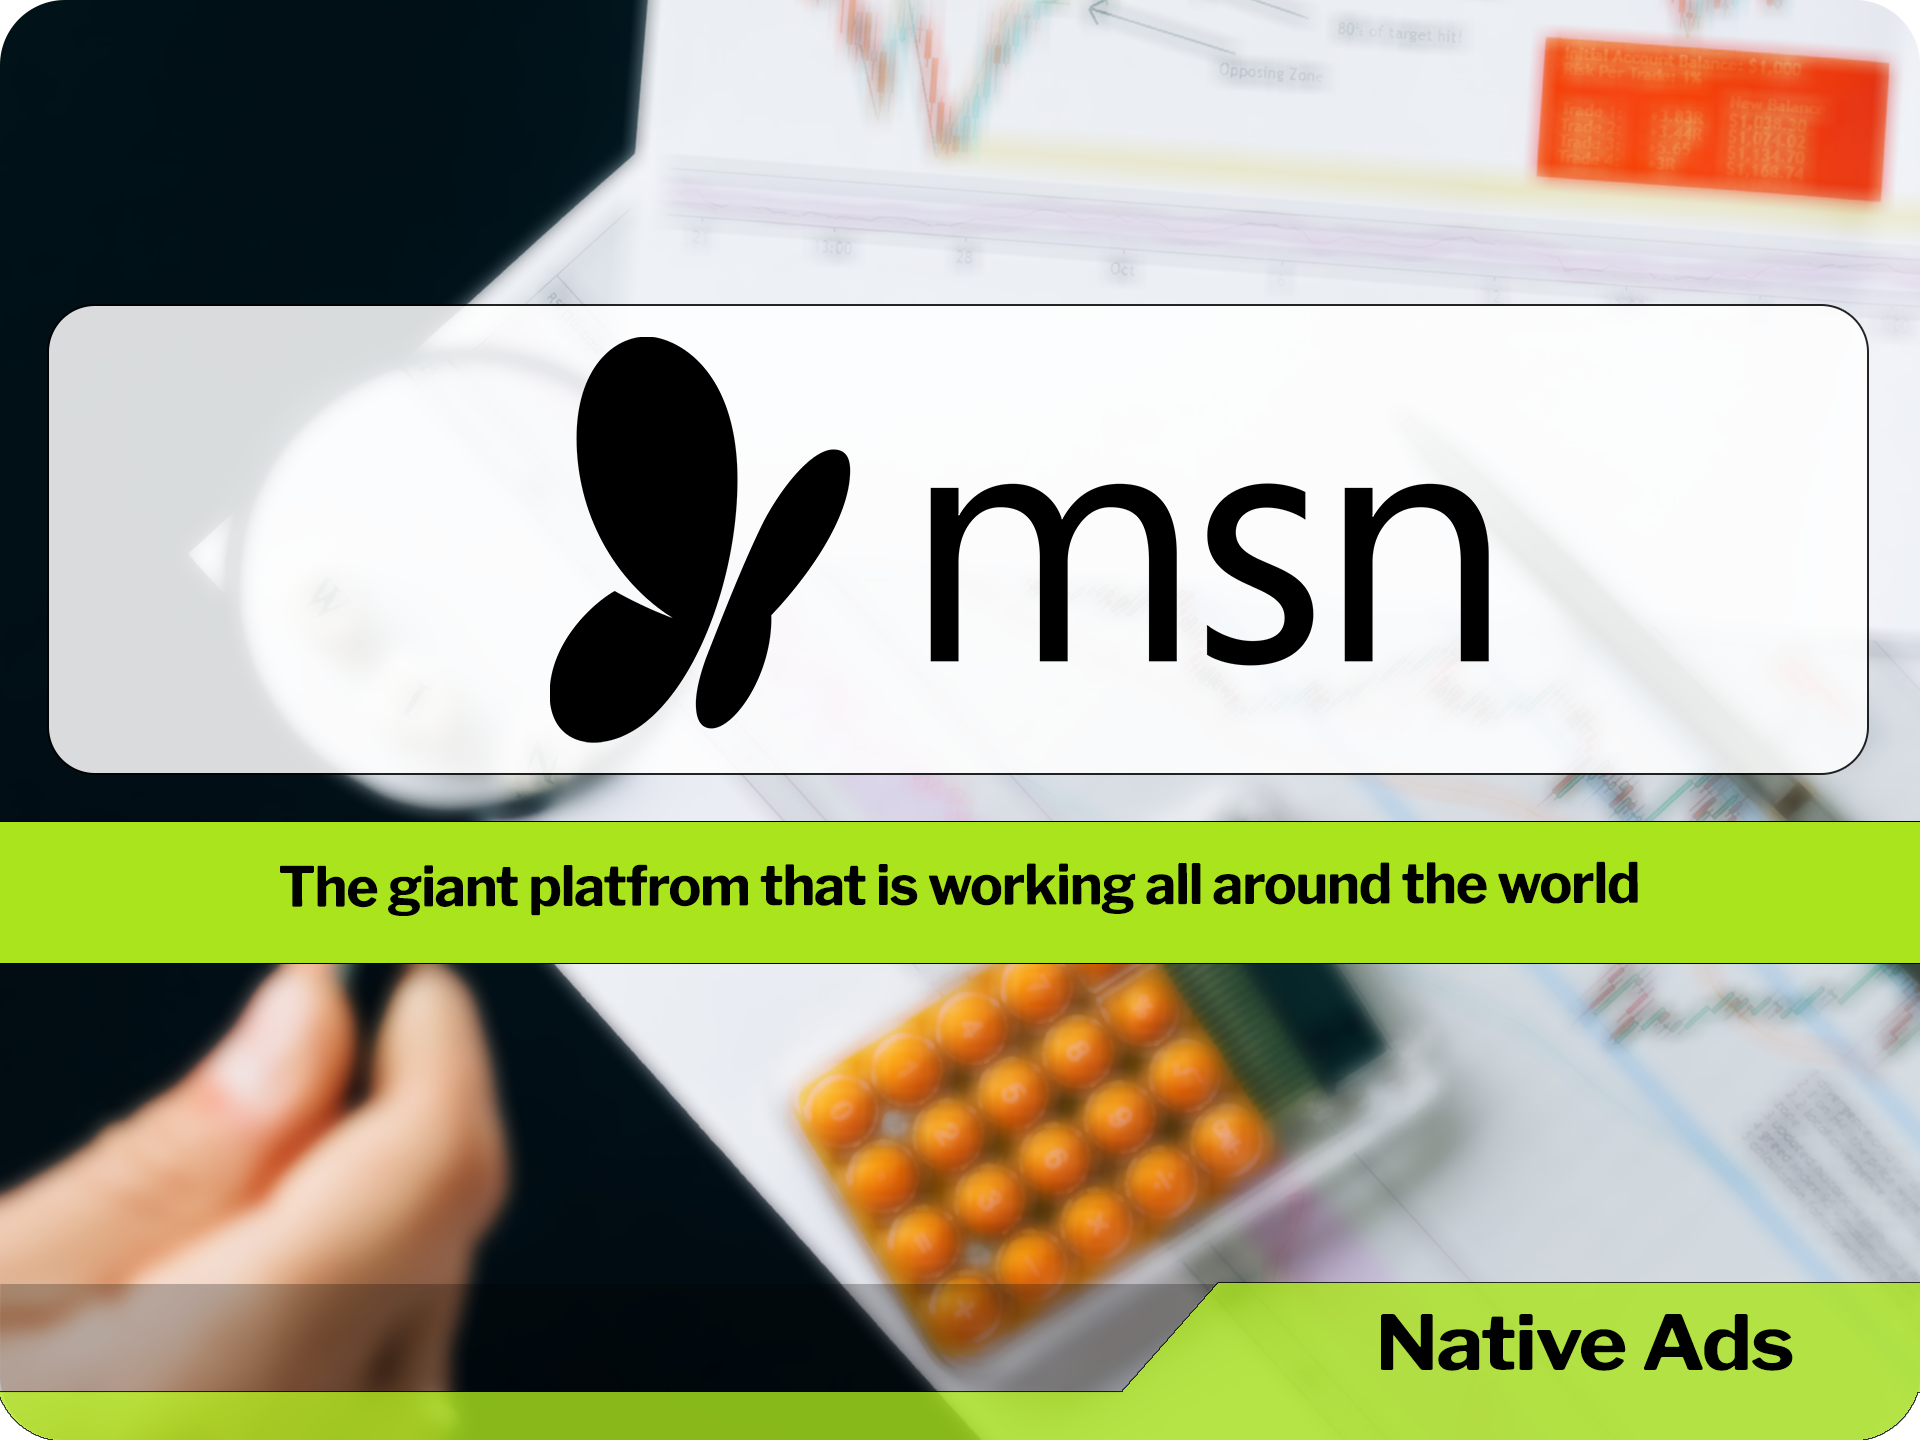 MSN provides APIs that can be used to manage advertising campaigns